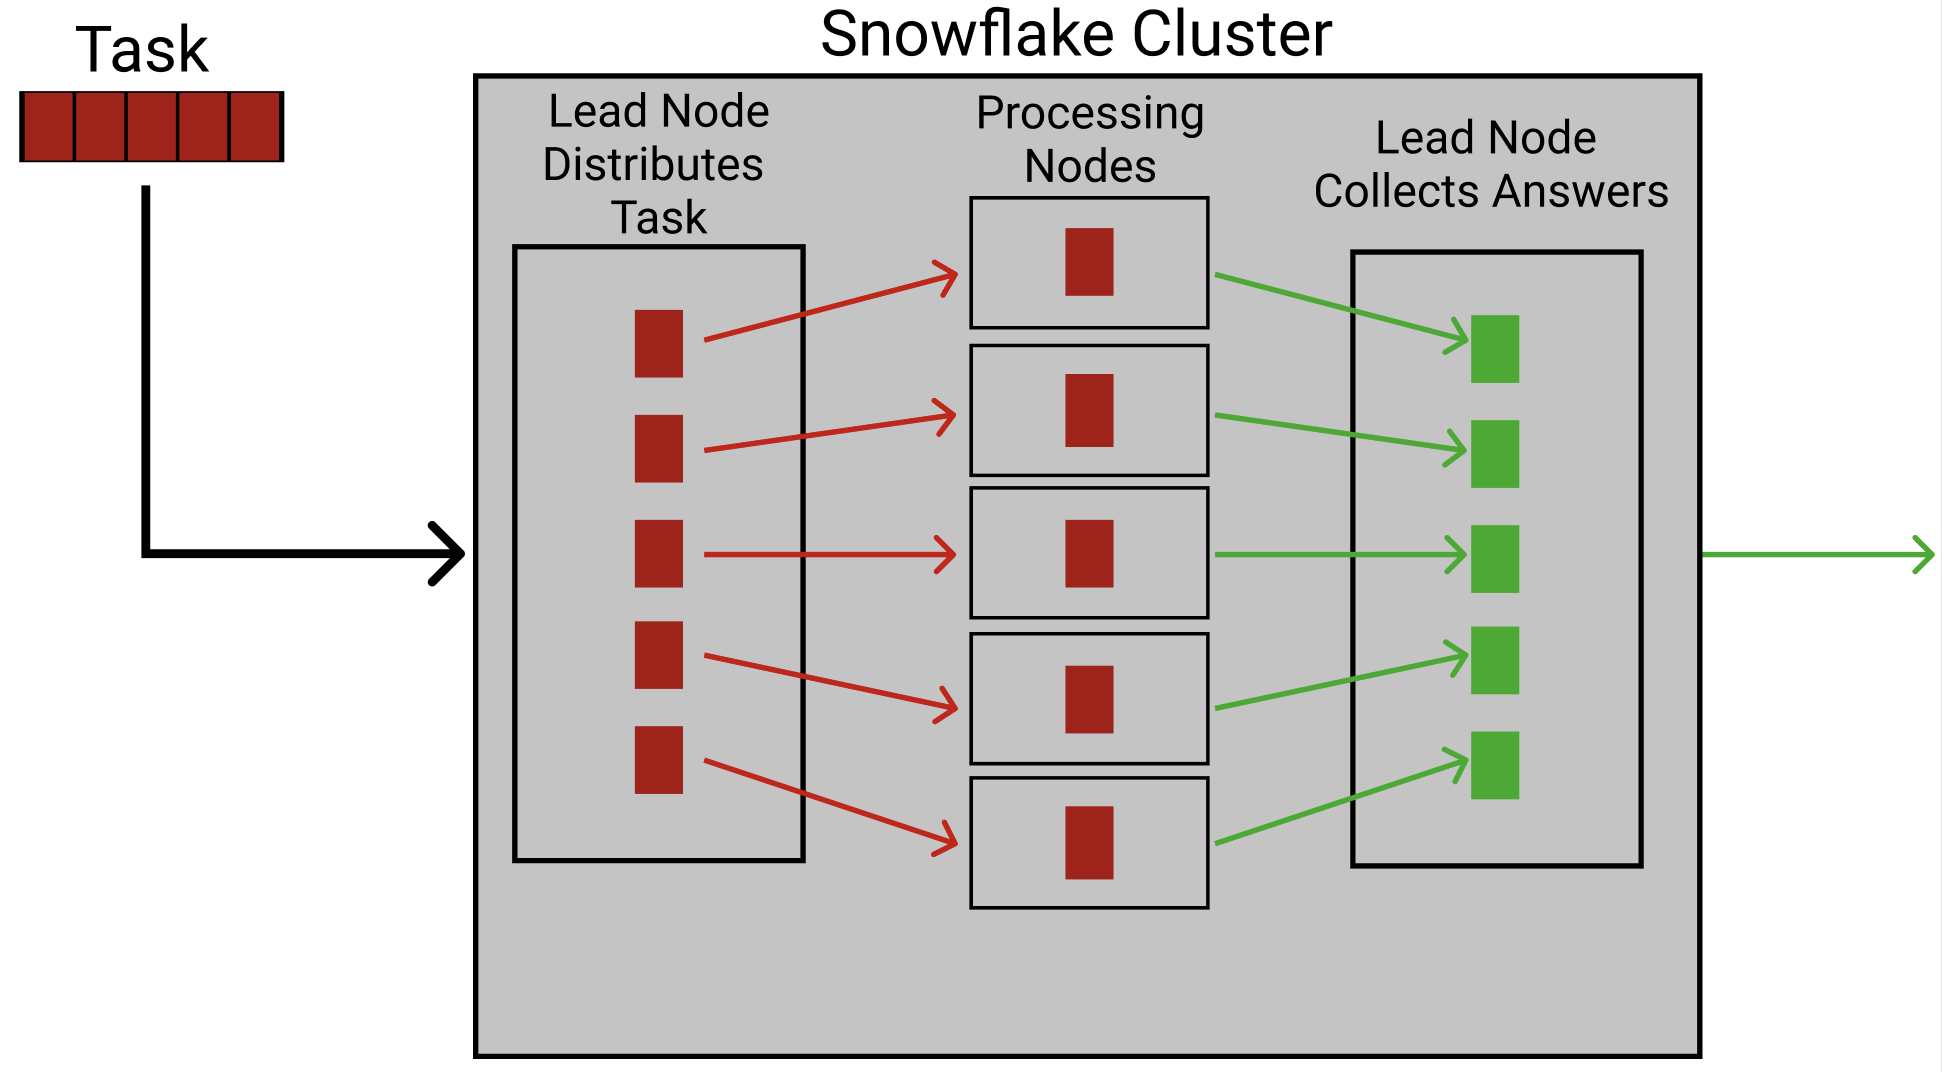 This image shows how a task is divided between processing nodes and reassembled